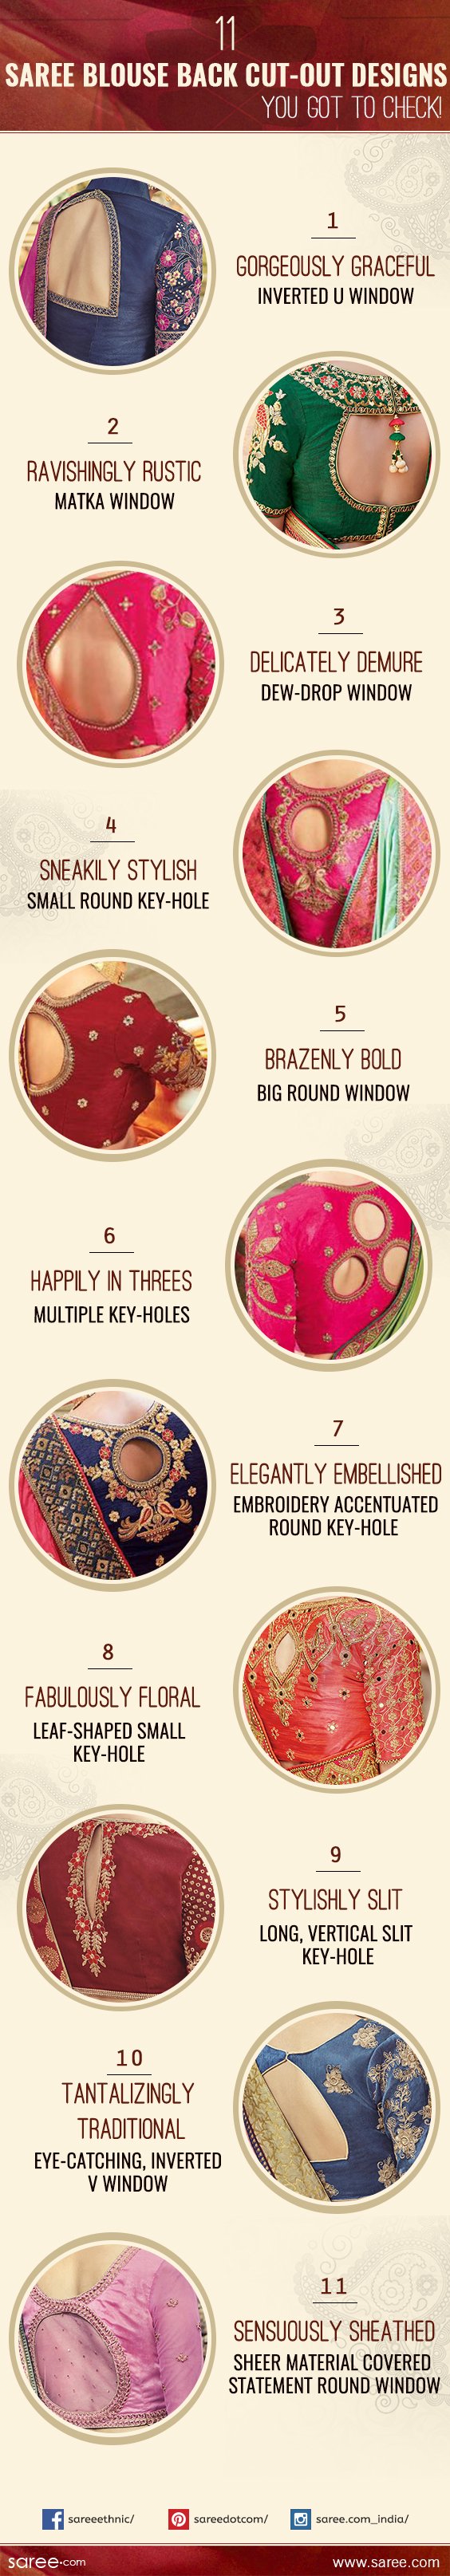 Window Style – Latest Saree Blouse Back Designs - INFOGRAPHIC